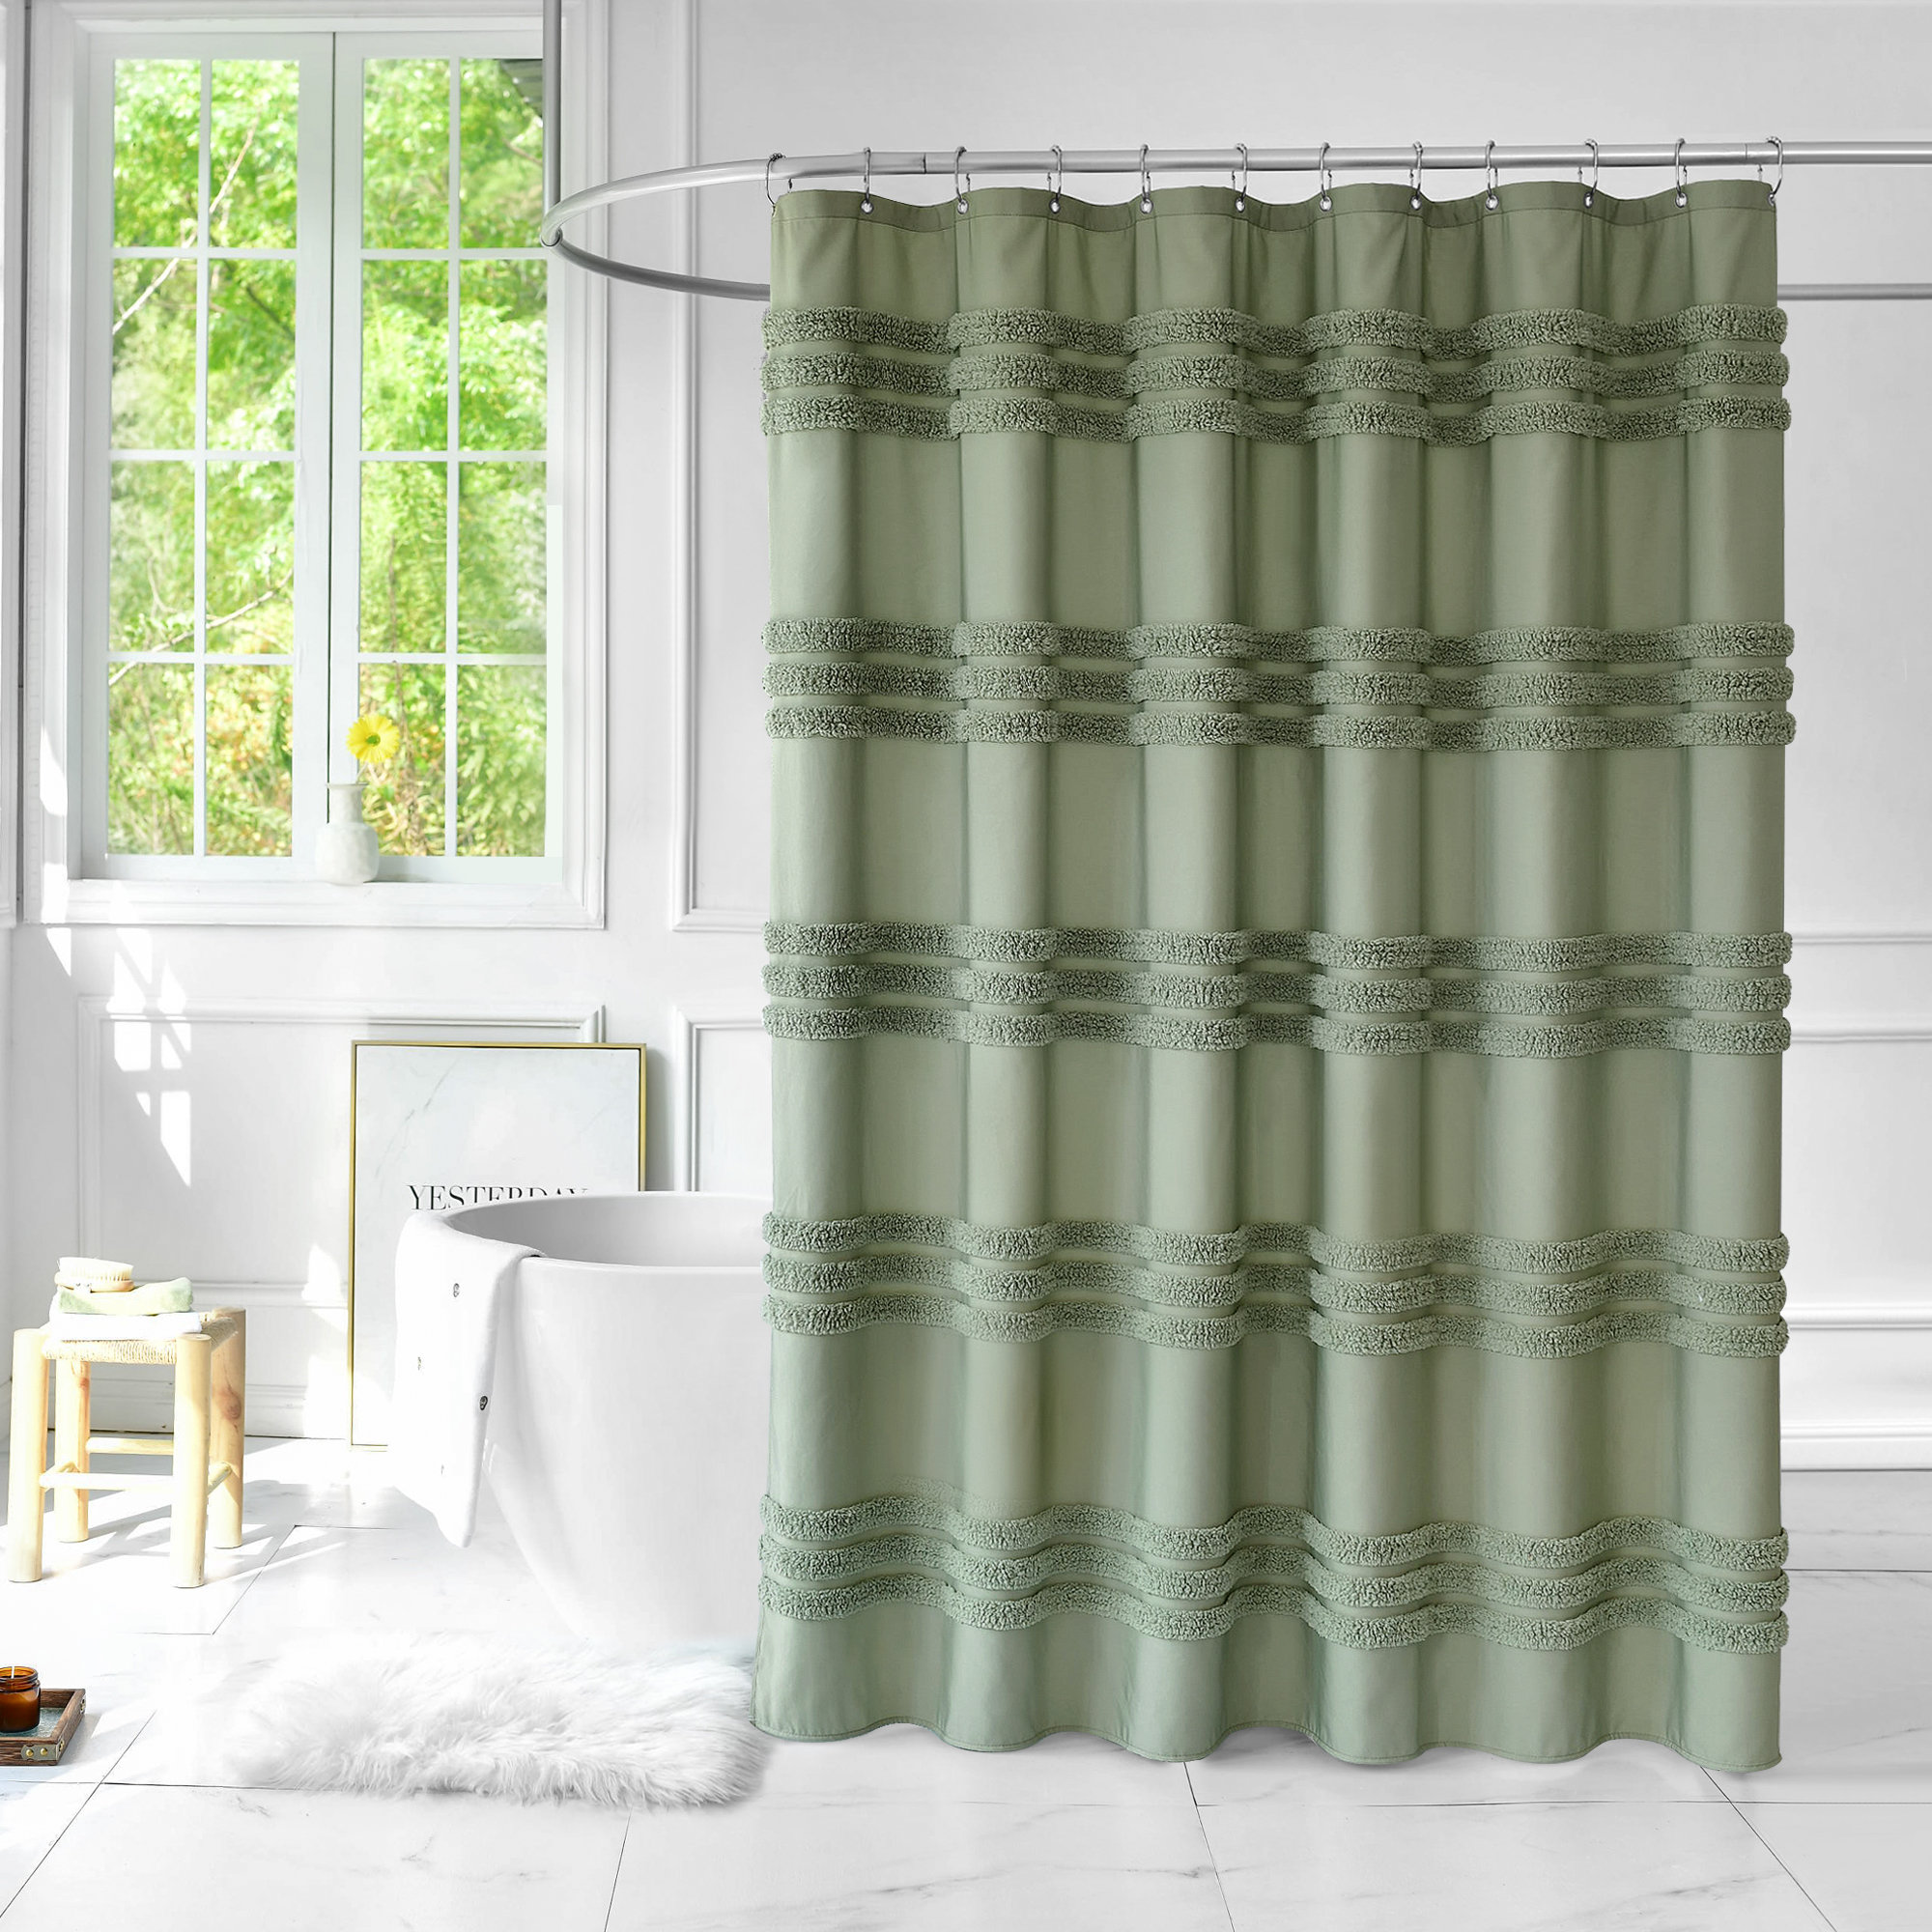 Jonestown Tufted Chenille Striped Textured Cloth Shower Curtain with 12 Stainless Steel Hooks Latitude Run Color: Green, Size: 79'' H x 72'' W